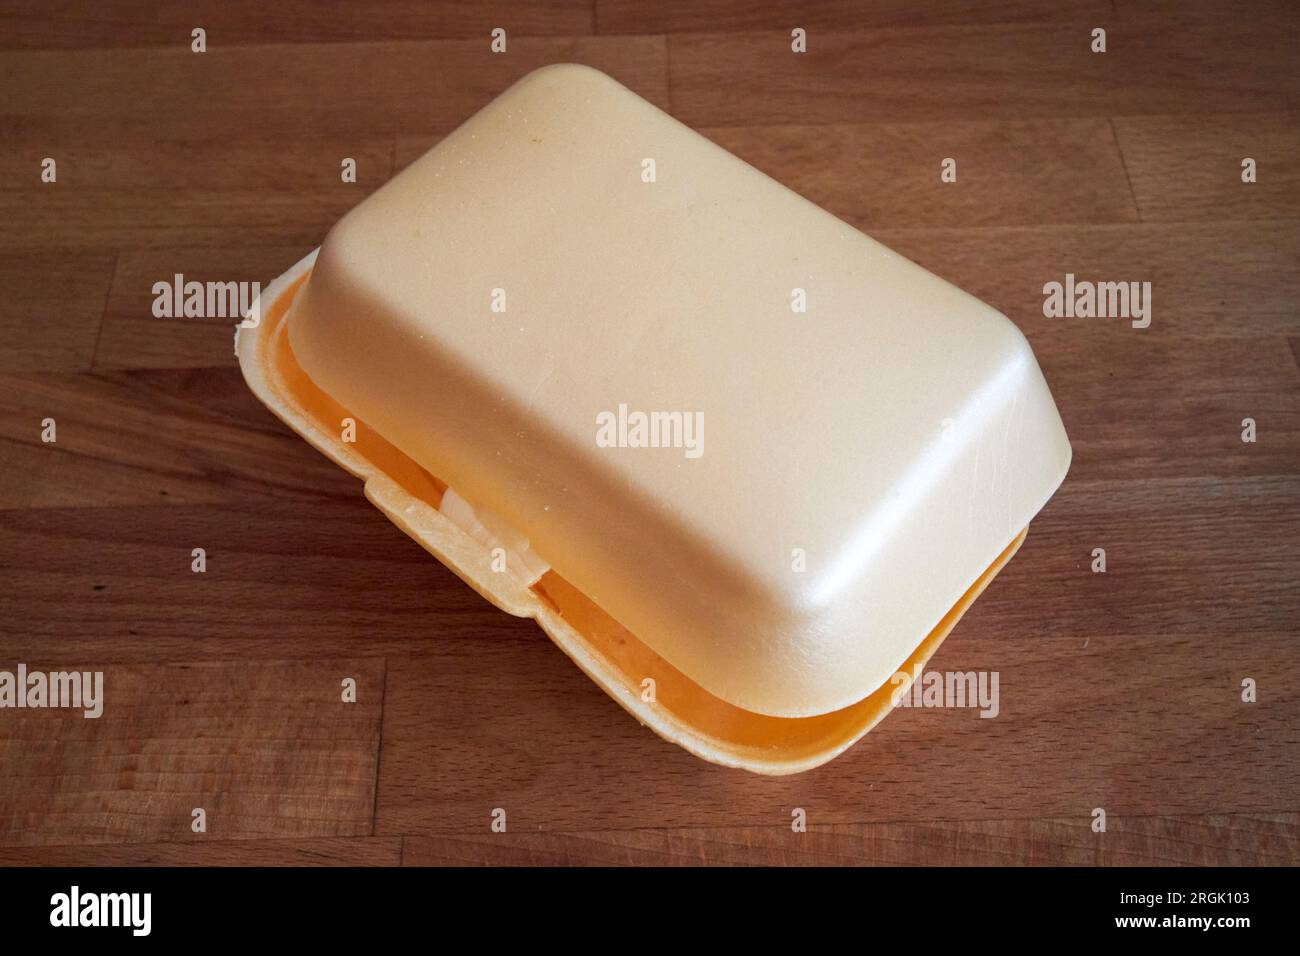 old polystyrene food packaging uk due to be phased out for more biodegradable recyclable options Stock Photo